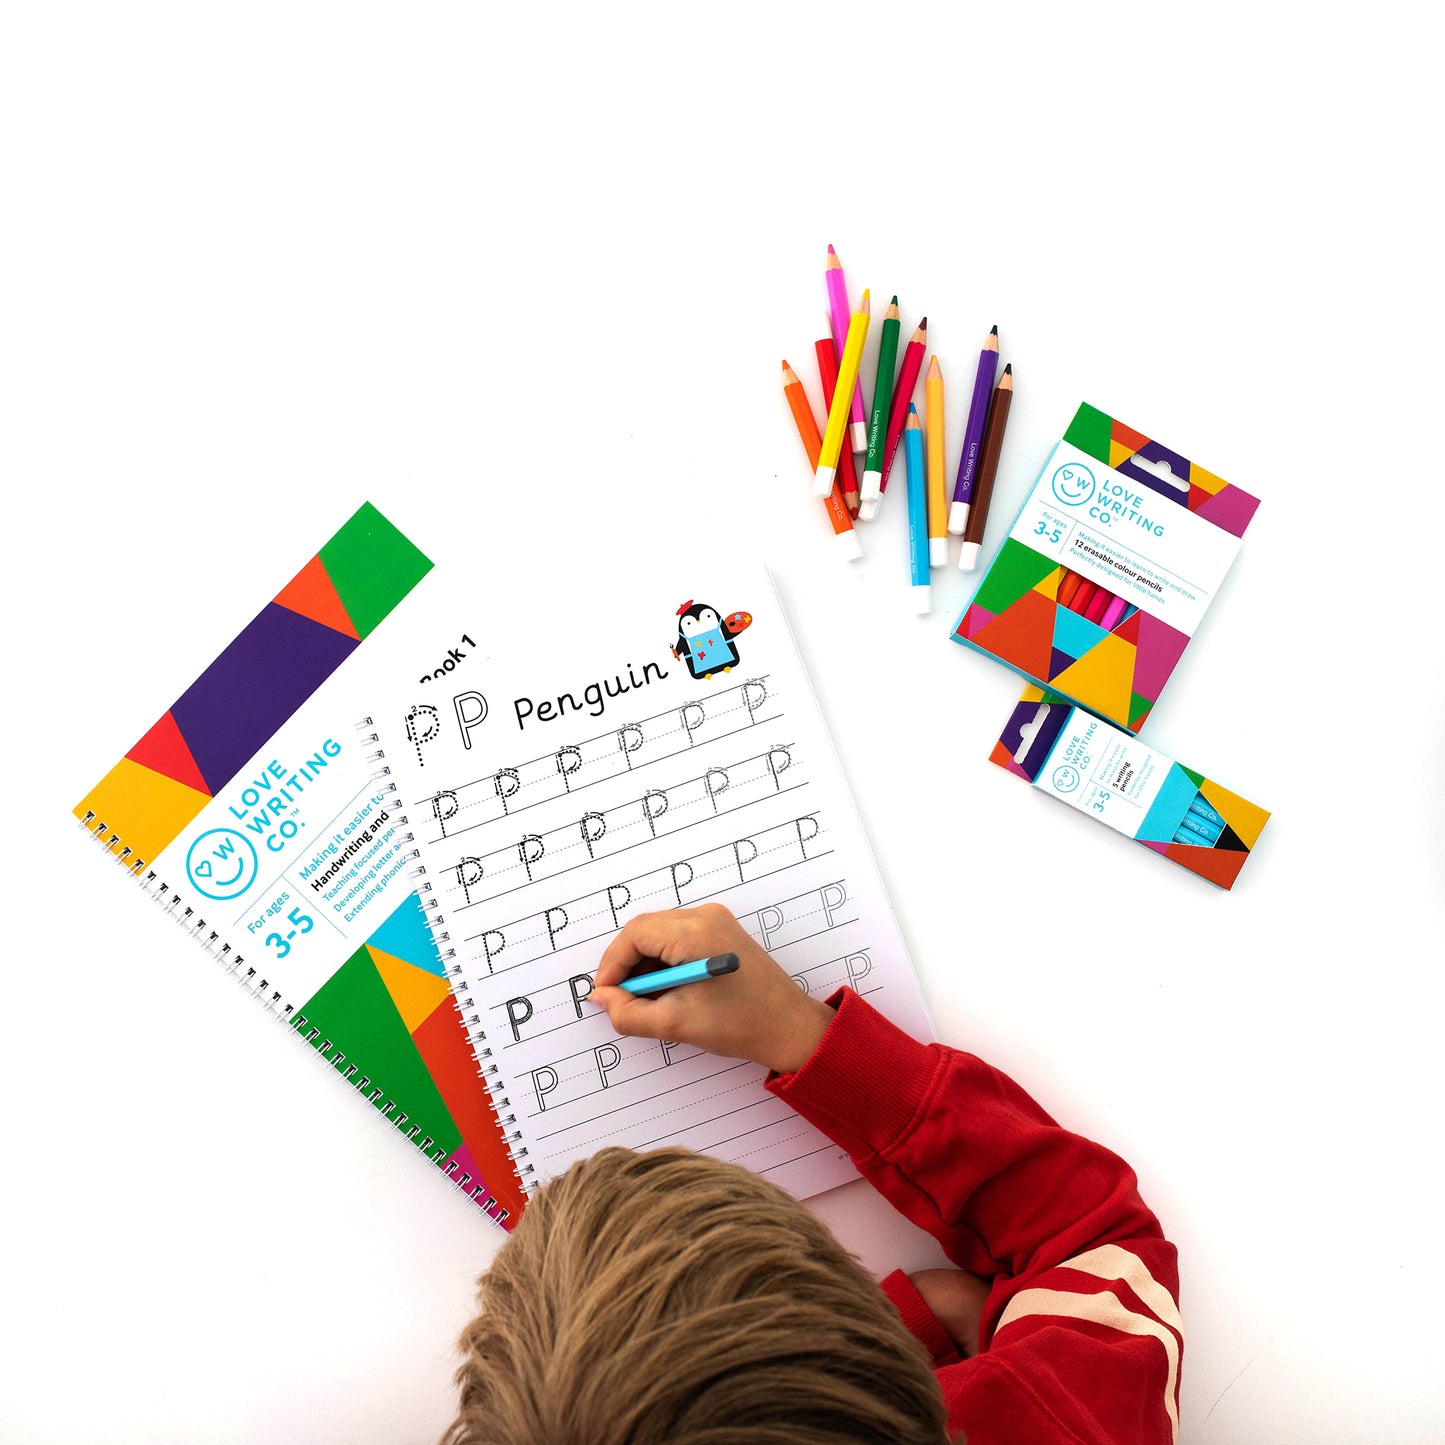 Child from above using activity pack and pencils to draw and learn to write 